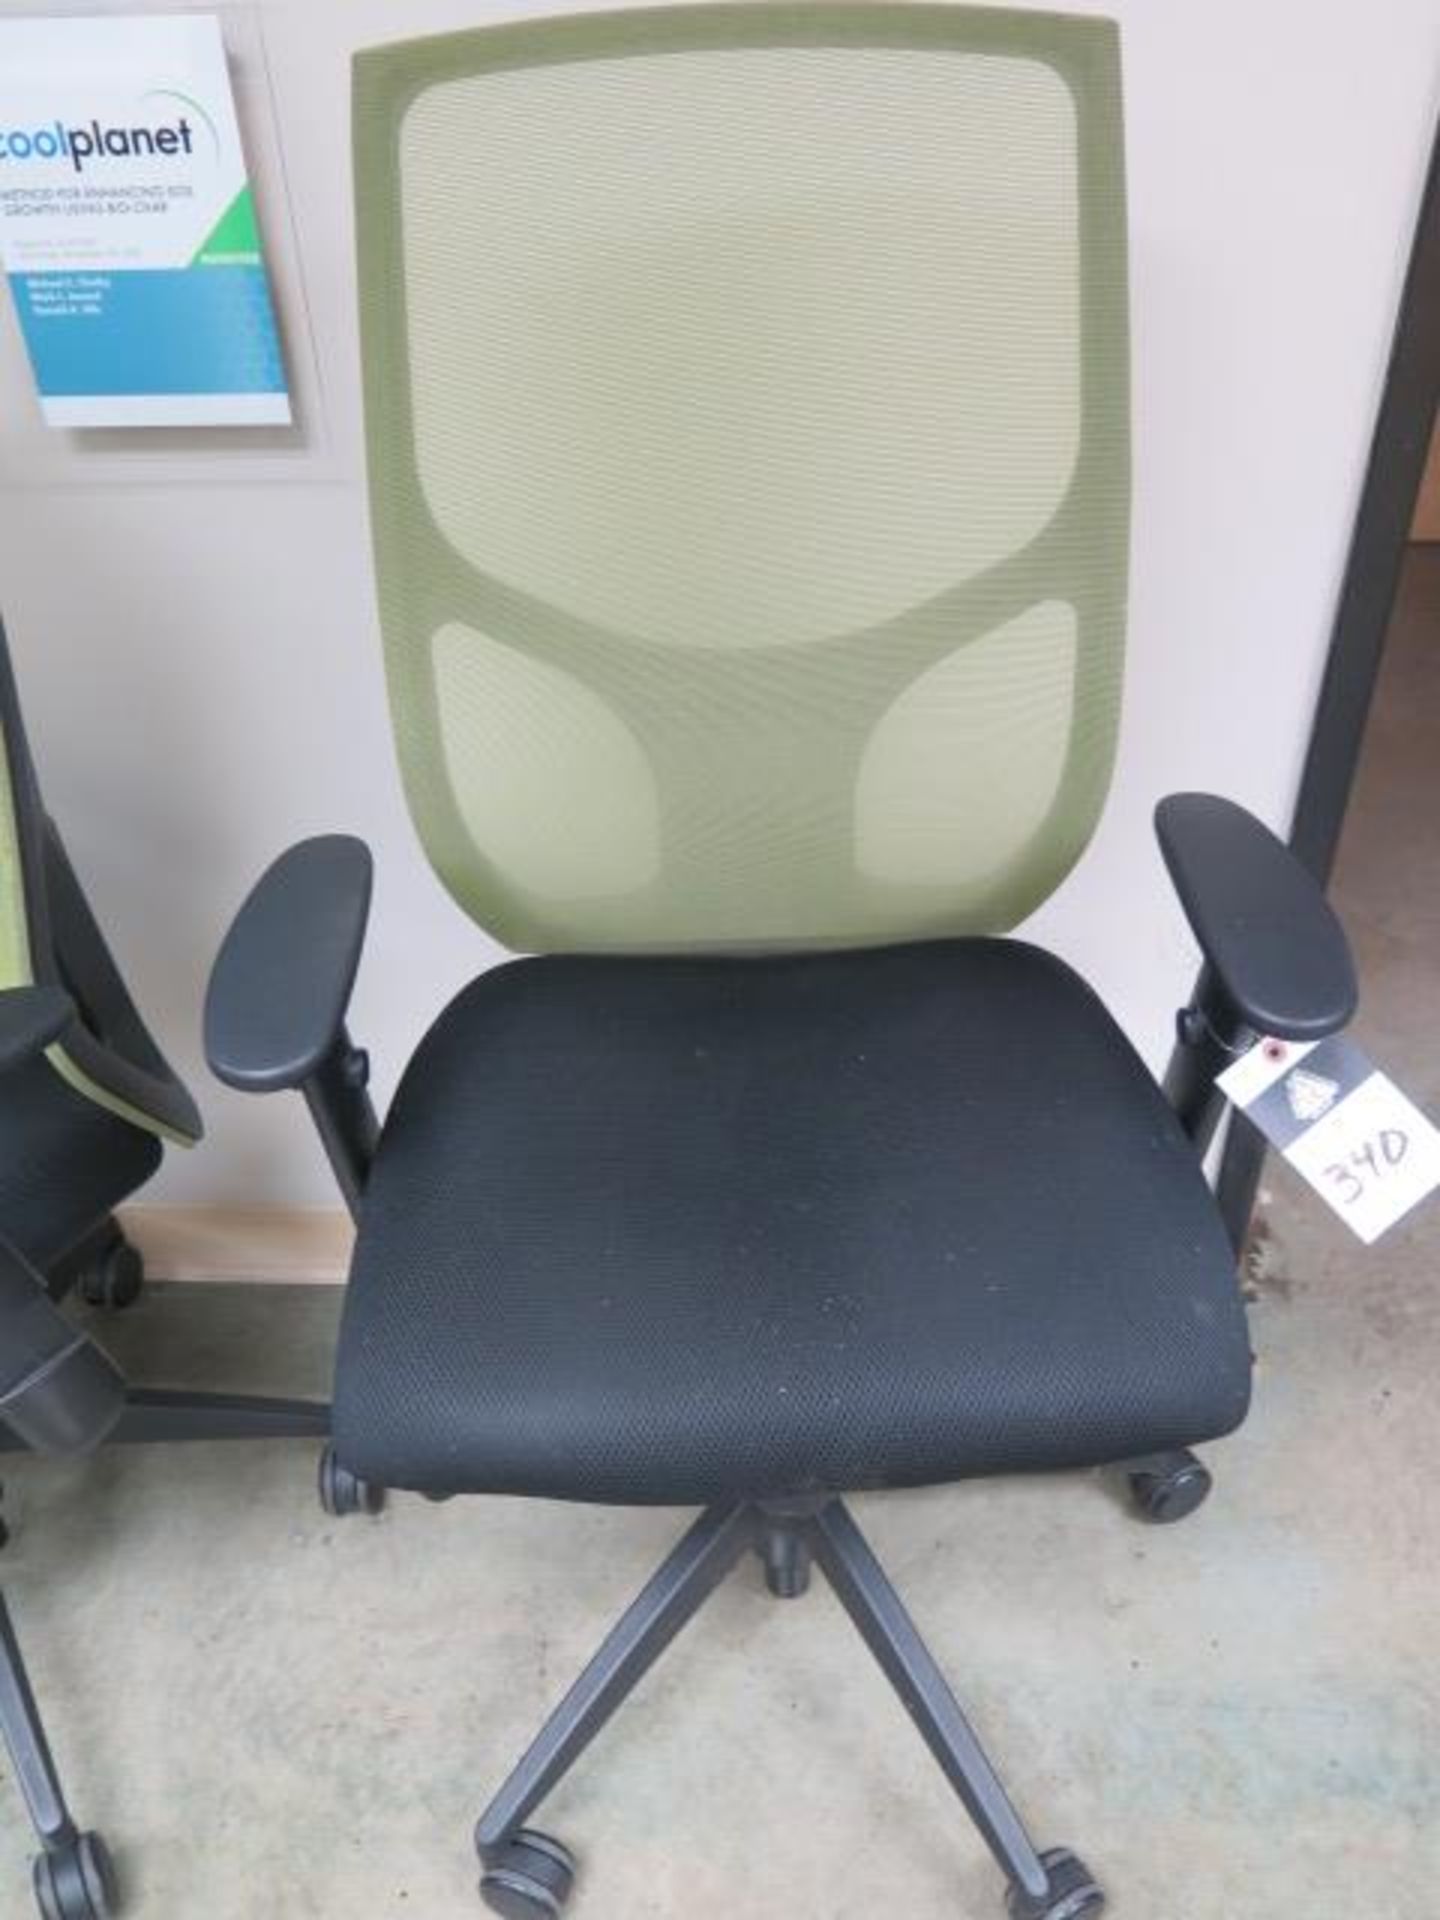 Ergonomic Office Chairs (7 - Green) - Image 2 of 5